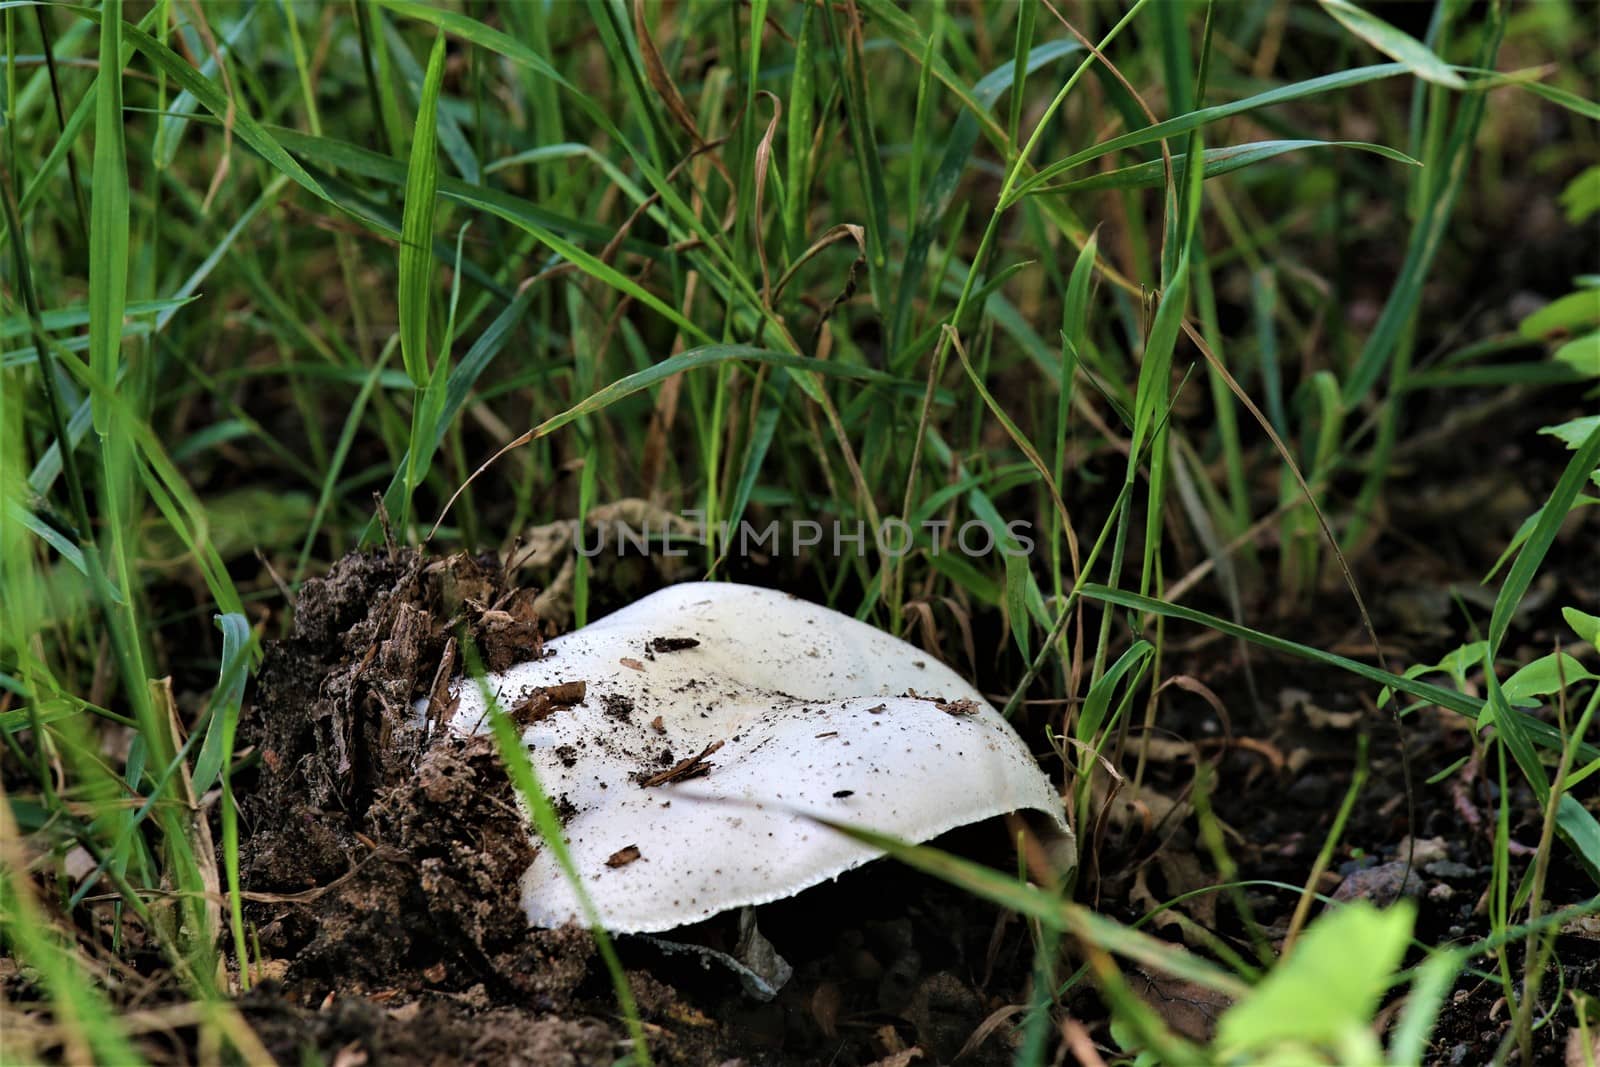 One white mushroom that just grows out of the earth